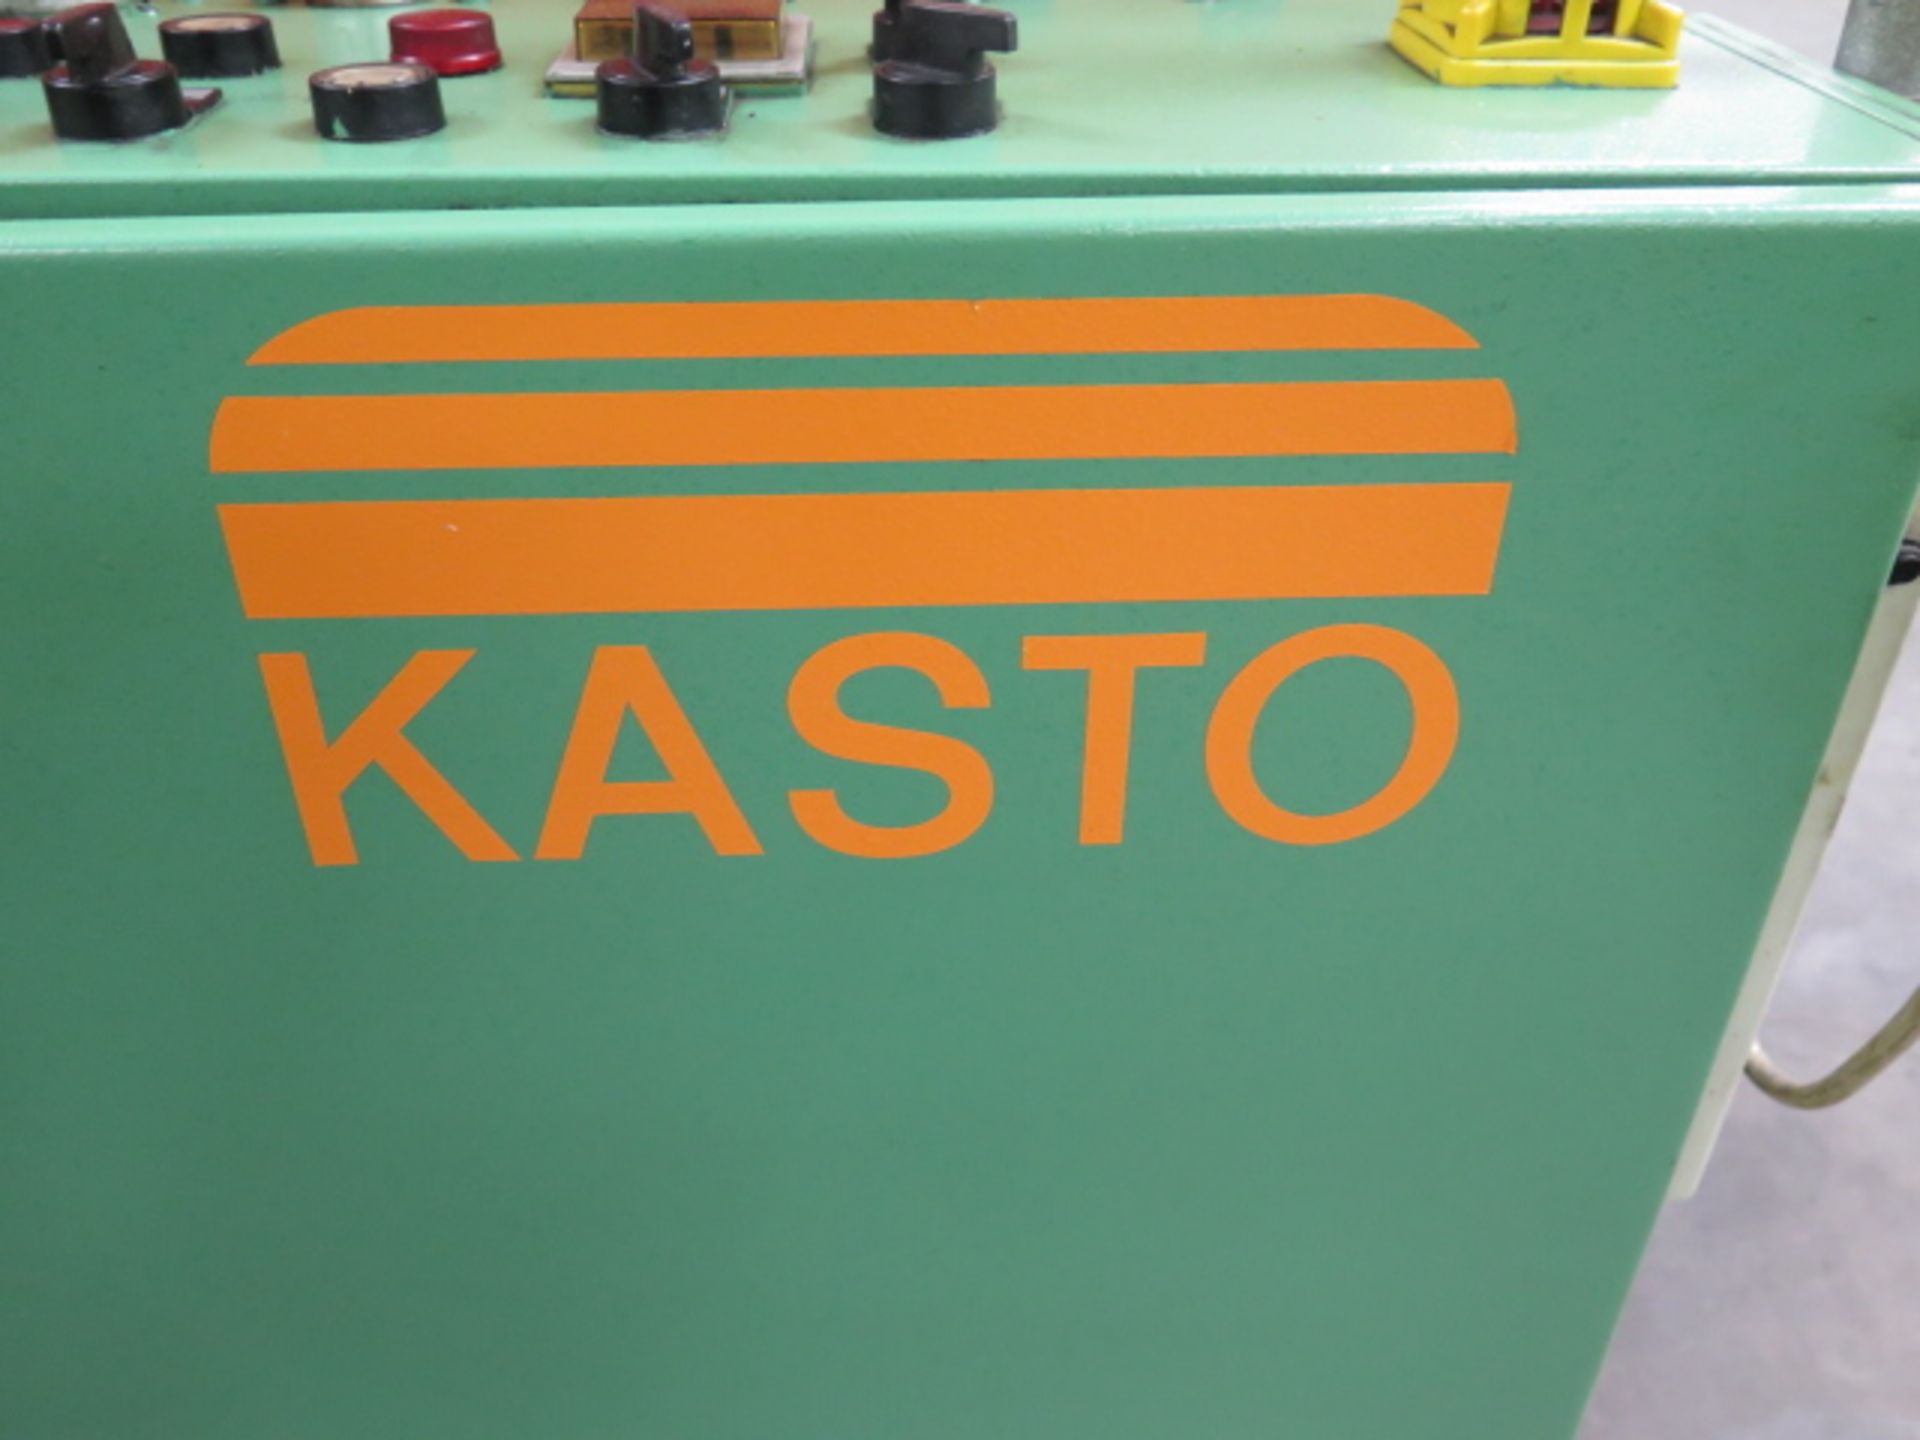 Kasto HBA360AU 15” Automatic Hydraulic Horizontal Band Saw w/ Hydraulic Clamping and Feeds, Chip - Image 4 of 5